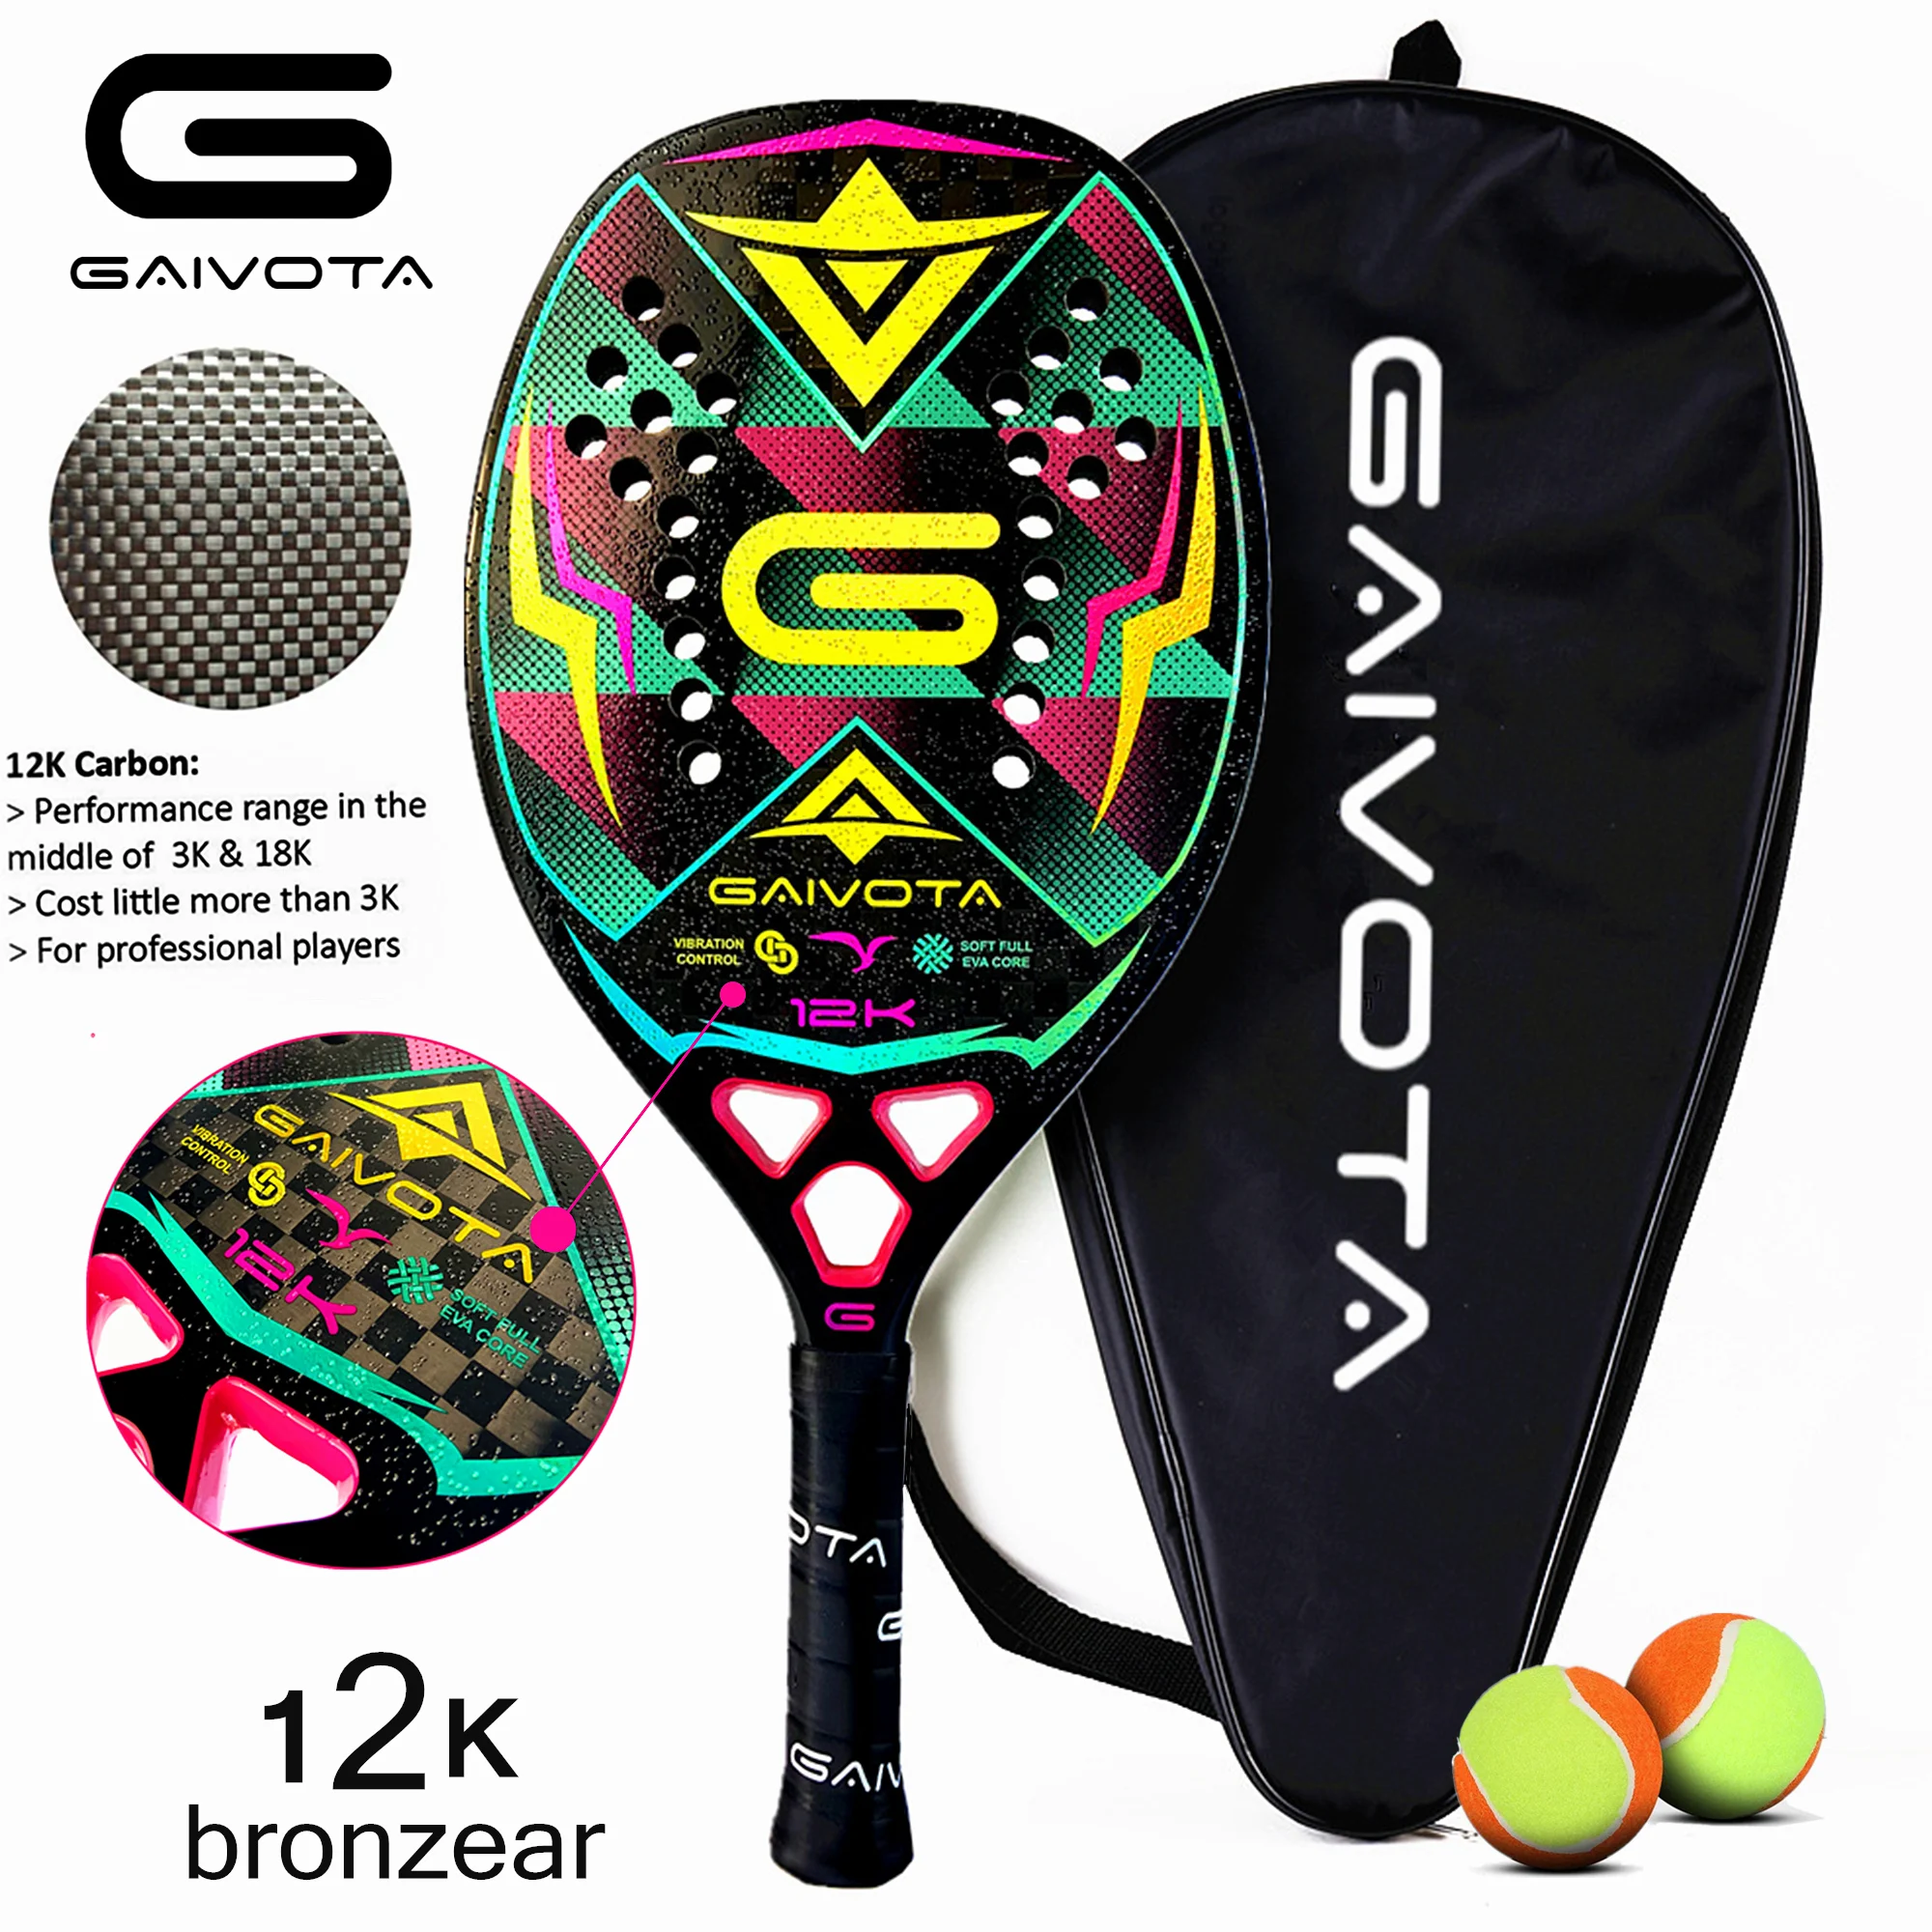 GAIVOTA 12K Carbon Fiber Beach Racket Limited Edition High End Racket with Laser Color Changing 3D Color Technology